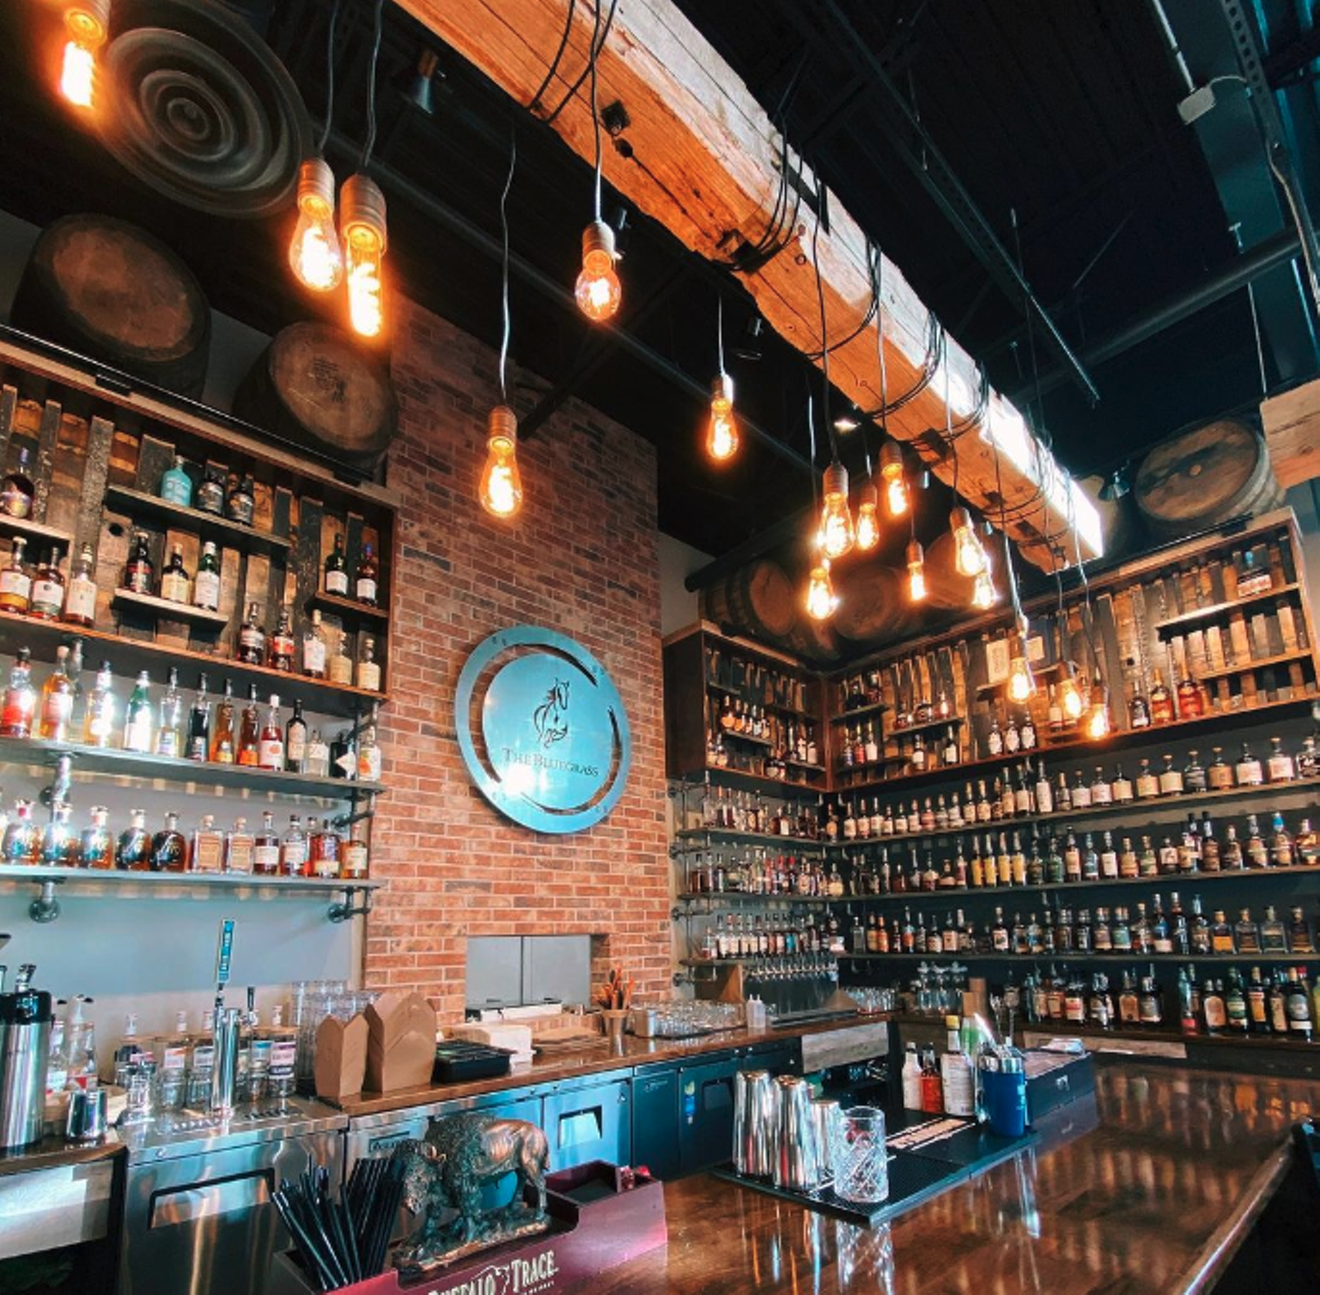 Arvada-based Bluegrass Coffee and Bourbon Lounge serves coffee during the day and bourbon at night.